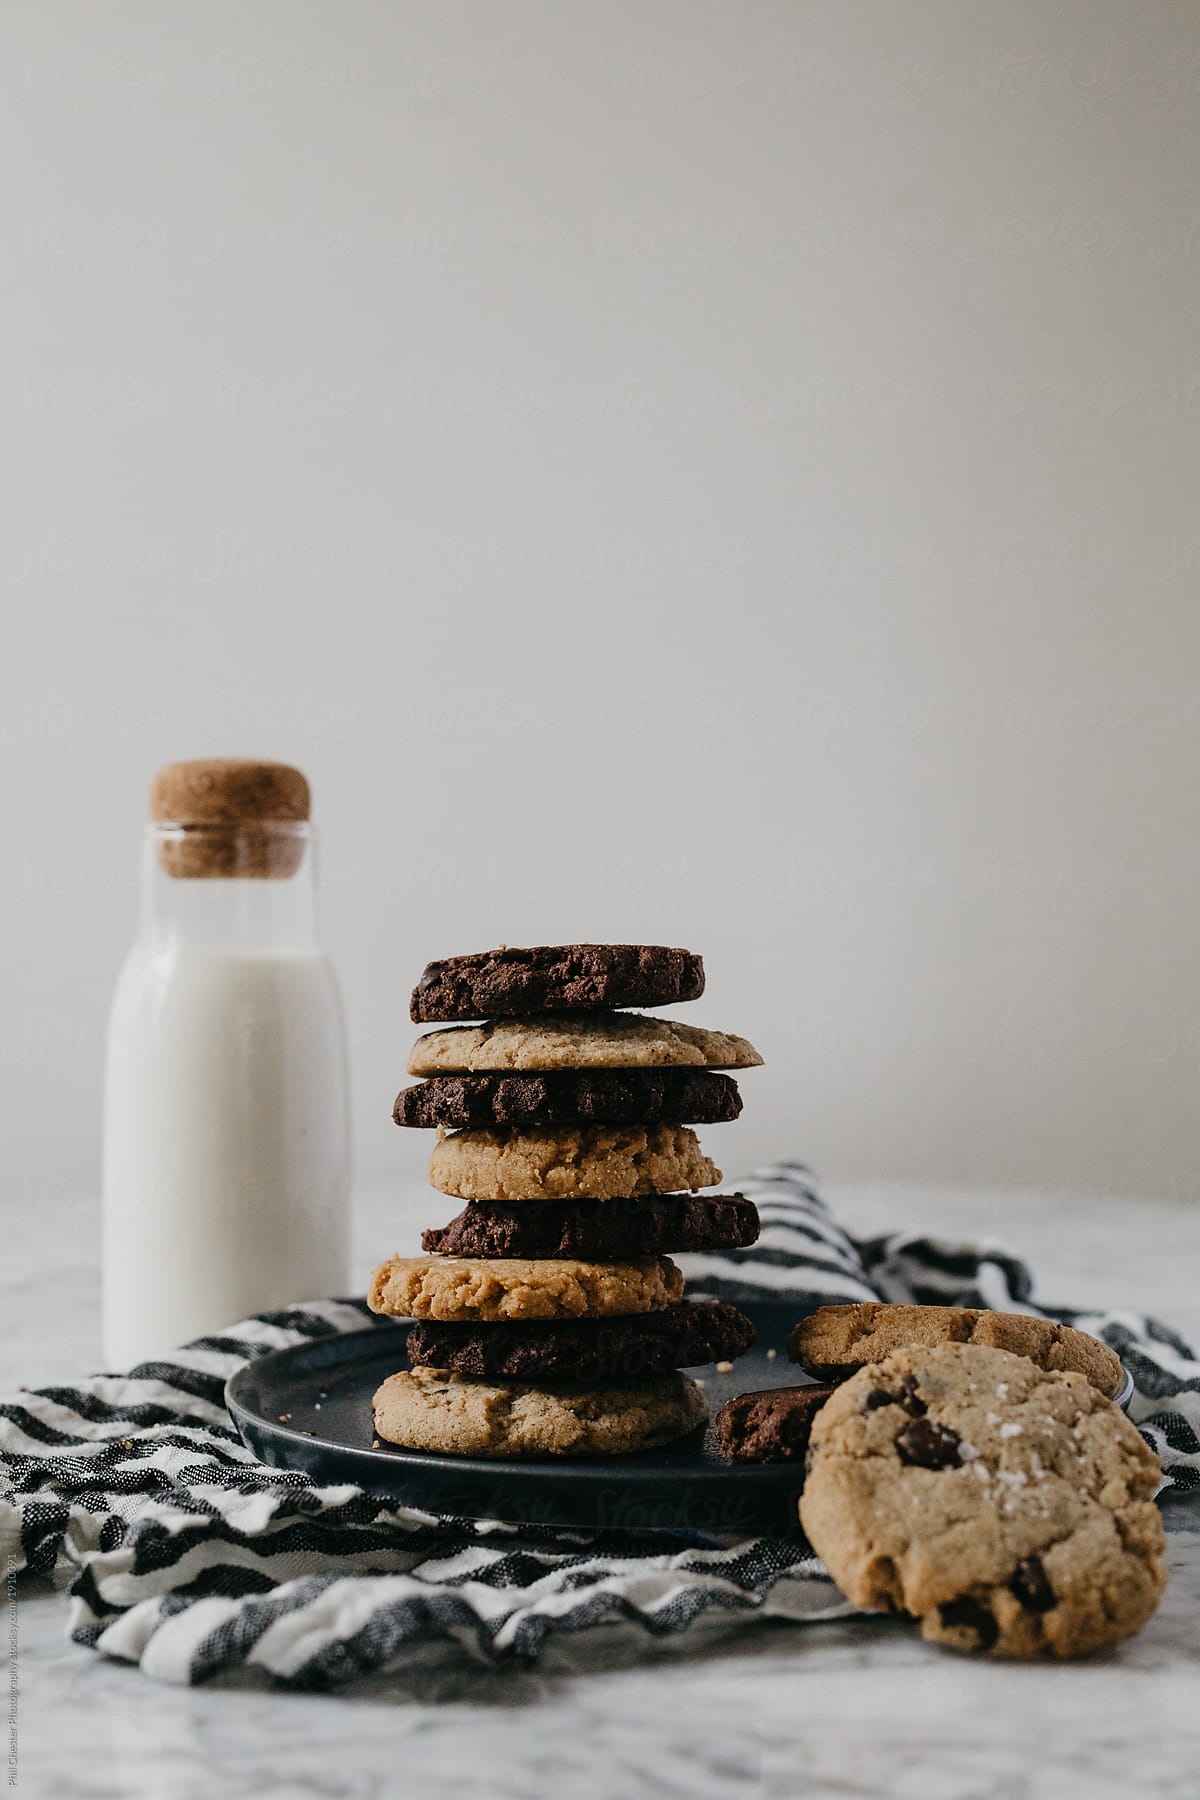 Cookies with Milk on plate with linens